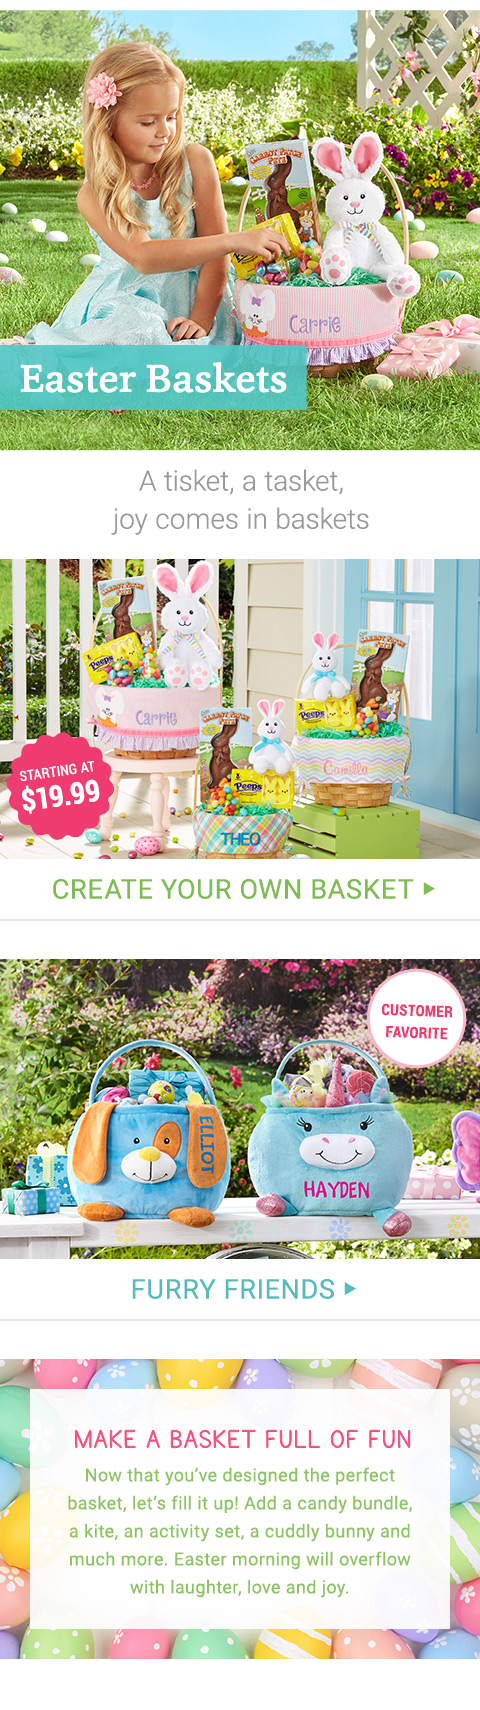 baskets for boys